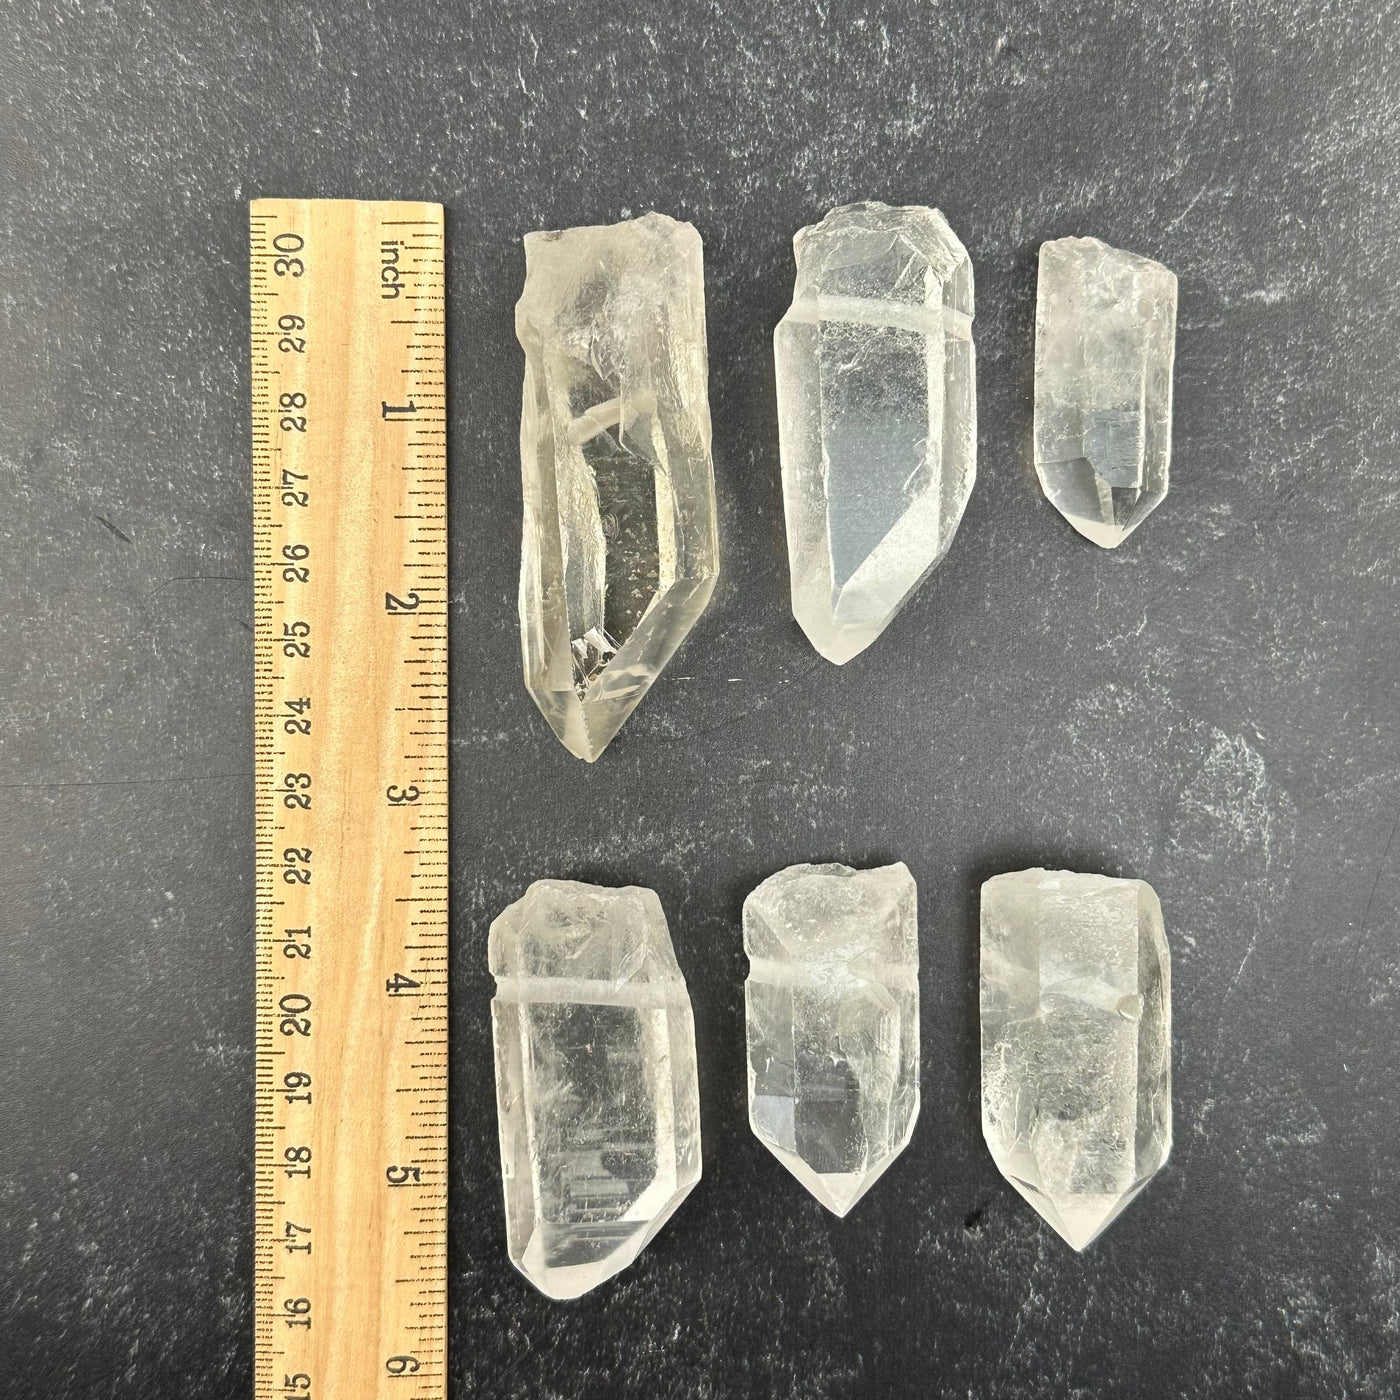 Crystal Quartz Point Rough Jumbo Size - Top Drilled next to a ruler for size reference 